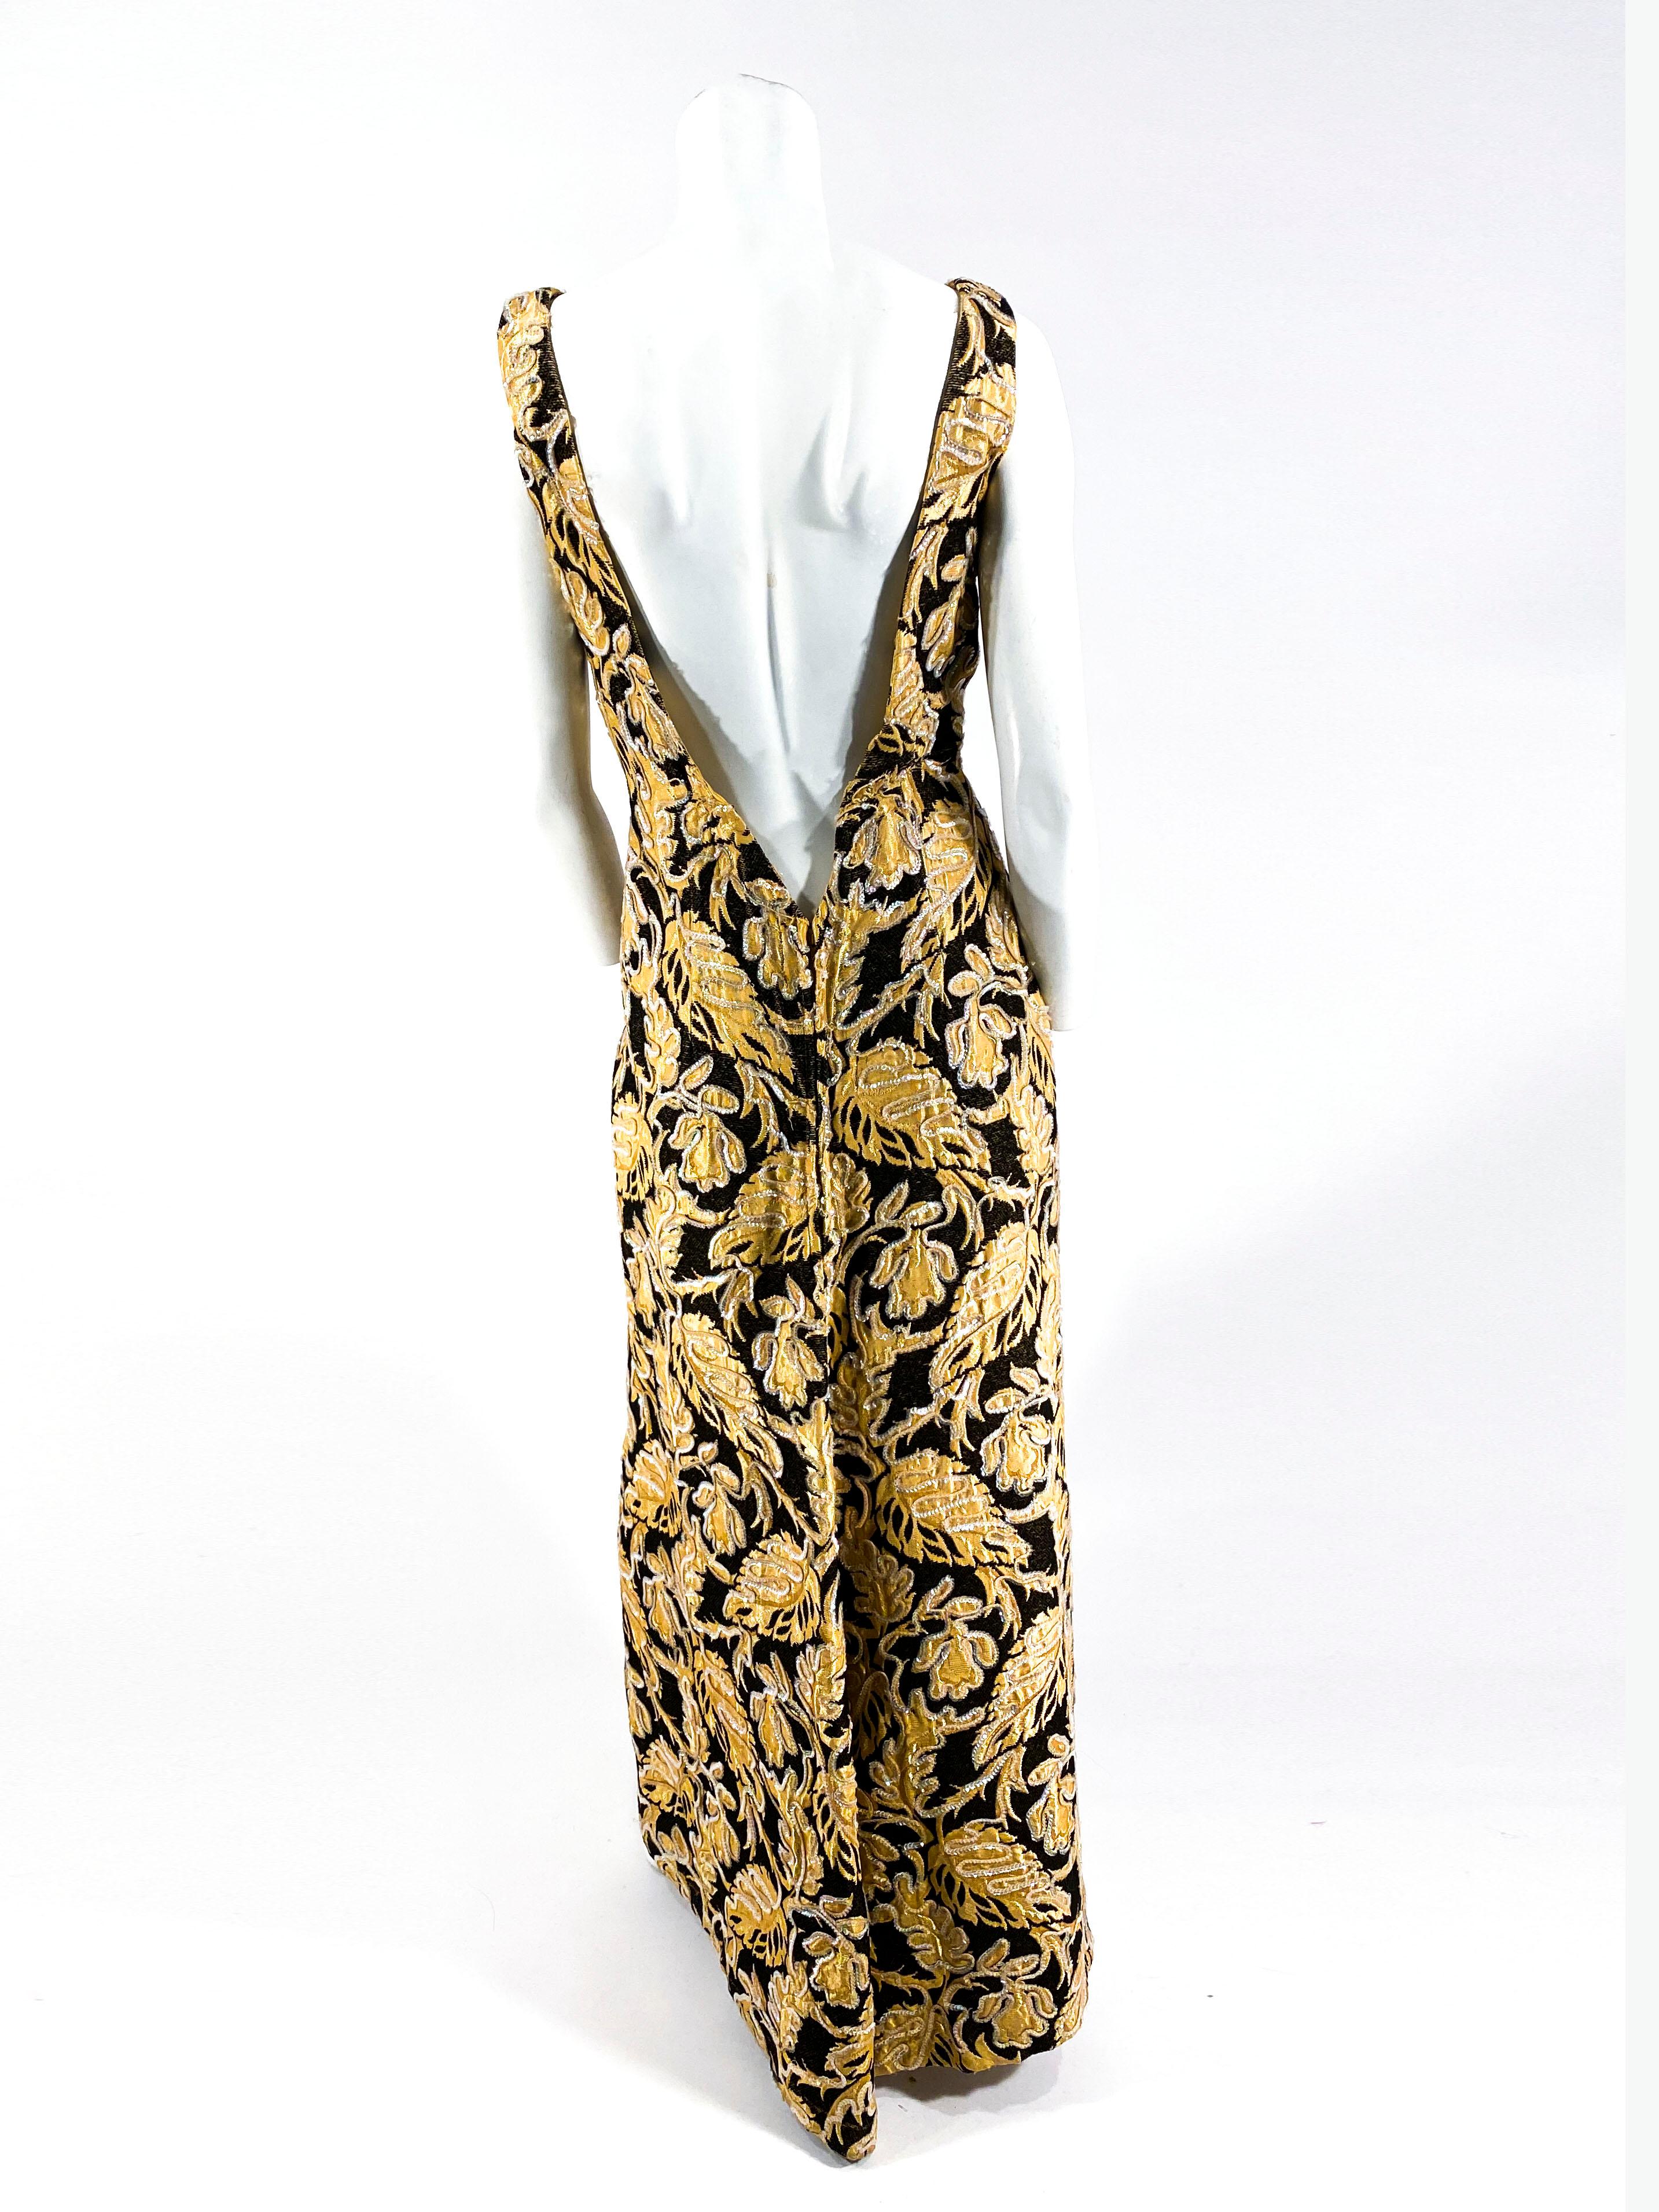 Custom made late 1950s to early 1960s gold and black chenille foliage tapestry gown with a semi-plunge neckline and an extremely low plunge backline going down to the was it. The entire dress is decorated with an iridescent sequin soutache. The